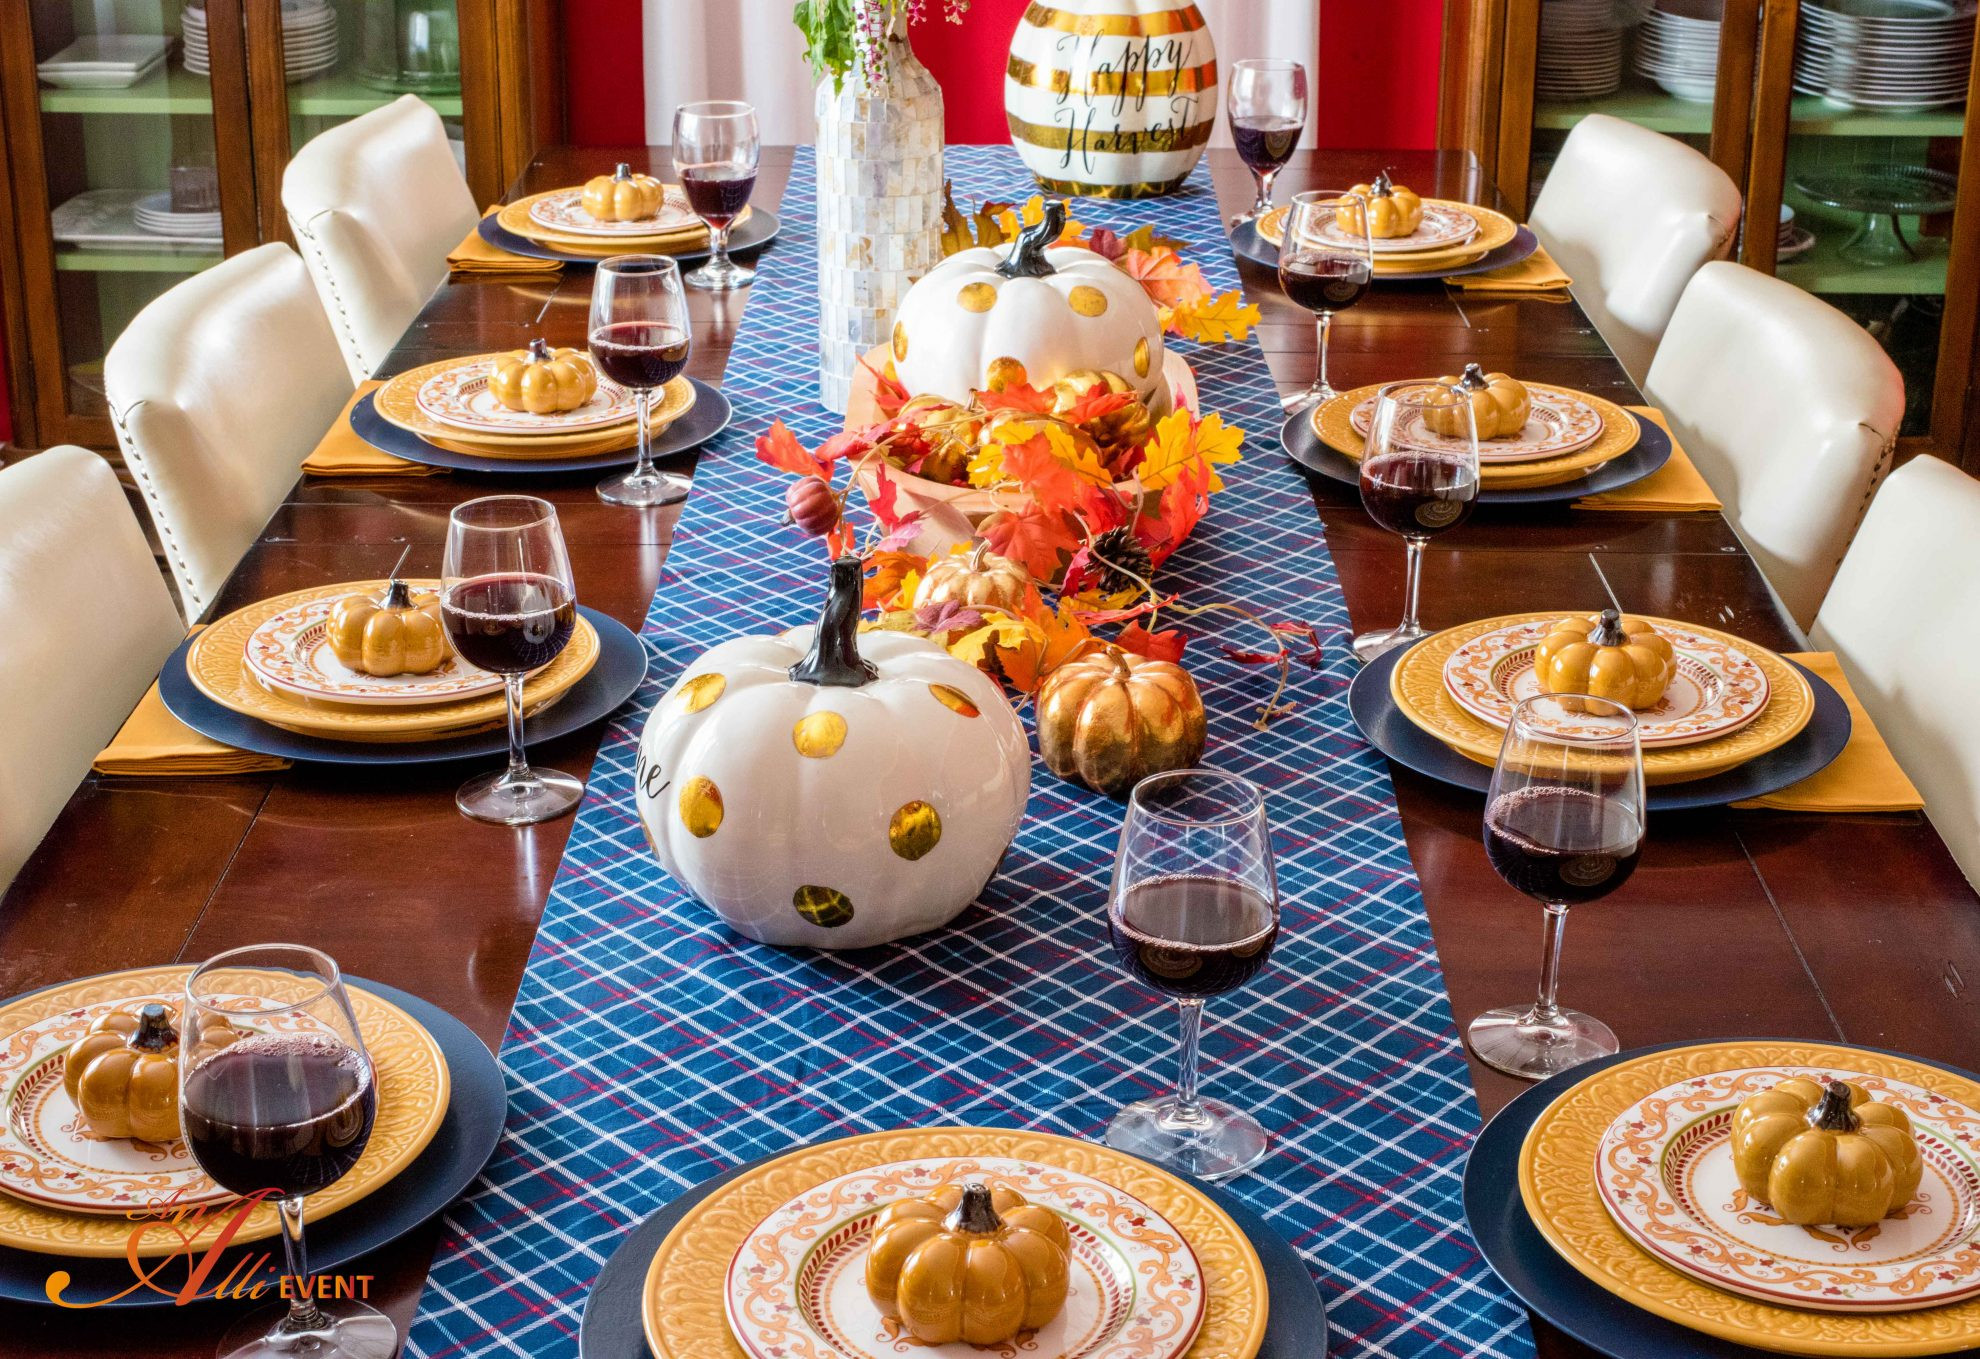 Rustic Thanksgiving Decor
 How to Set a Cozy Rustic Thanksgiving Table An Alli Event